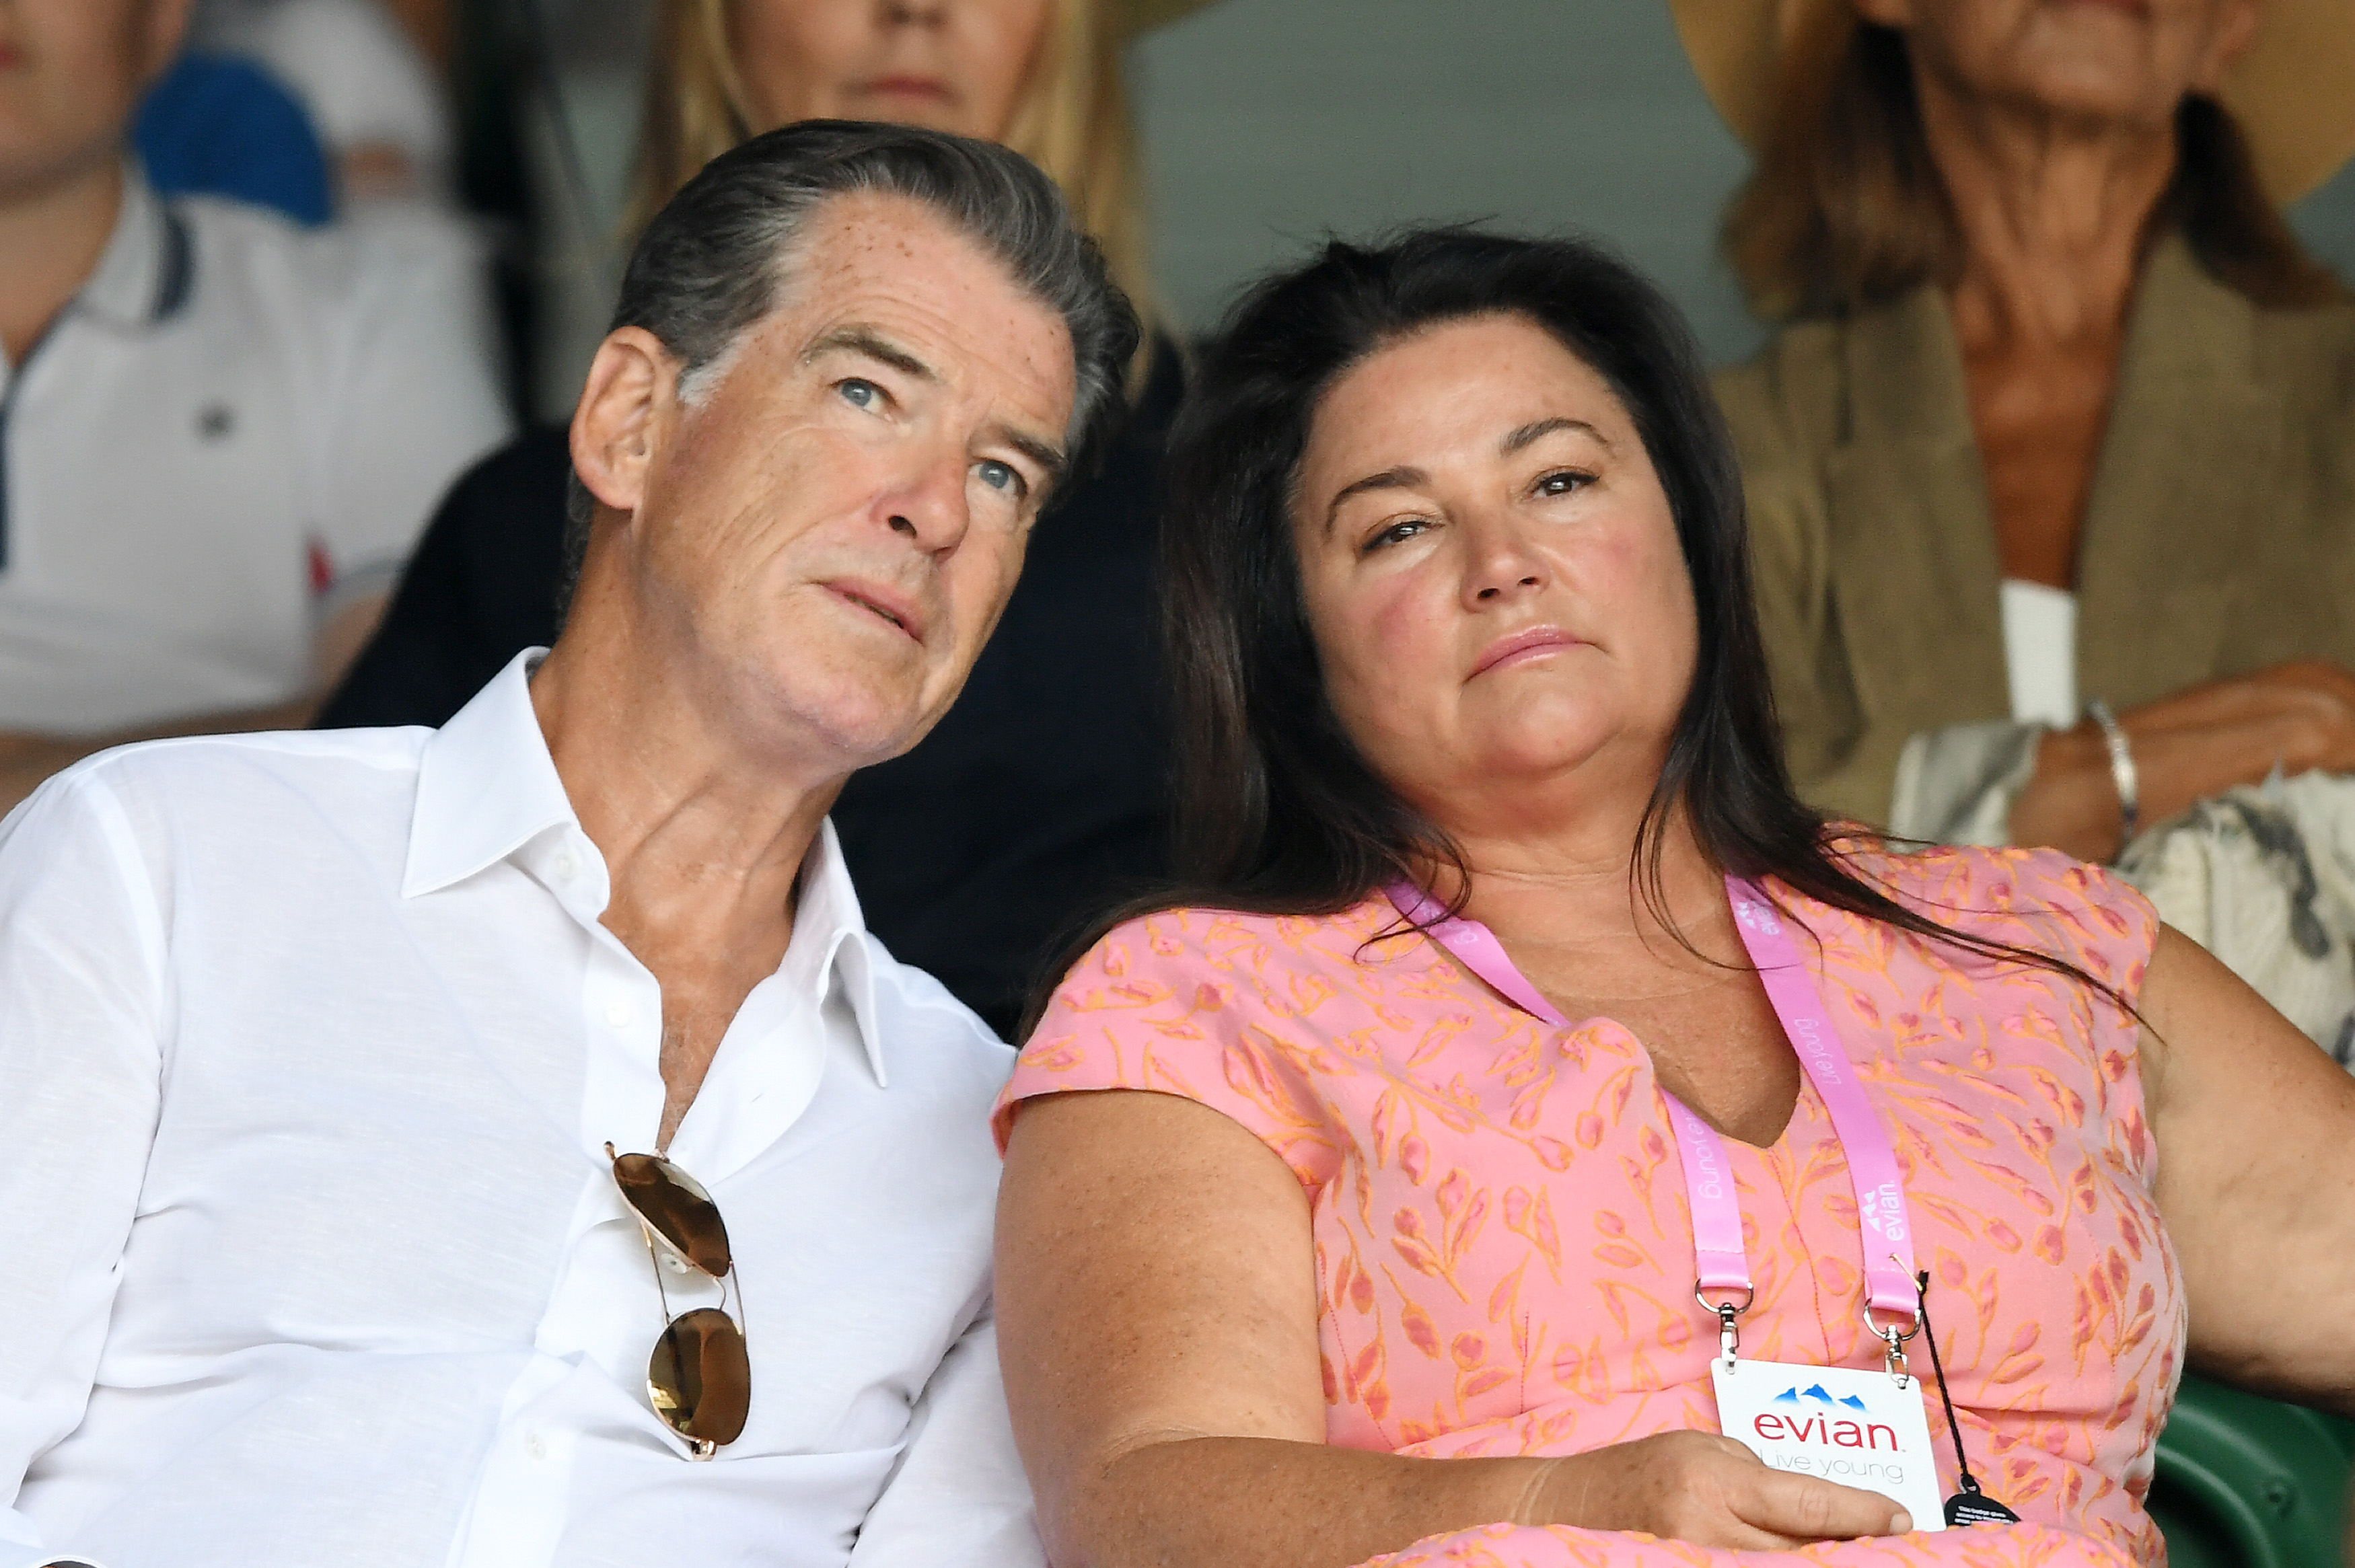 Pierce Brosnan and Keely Shaye Smith in London, England on July 13, 2018 | Source: Getty Images 